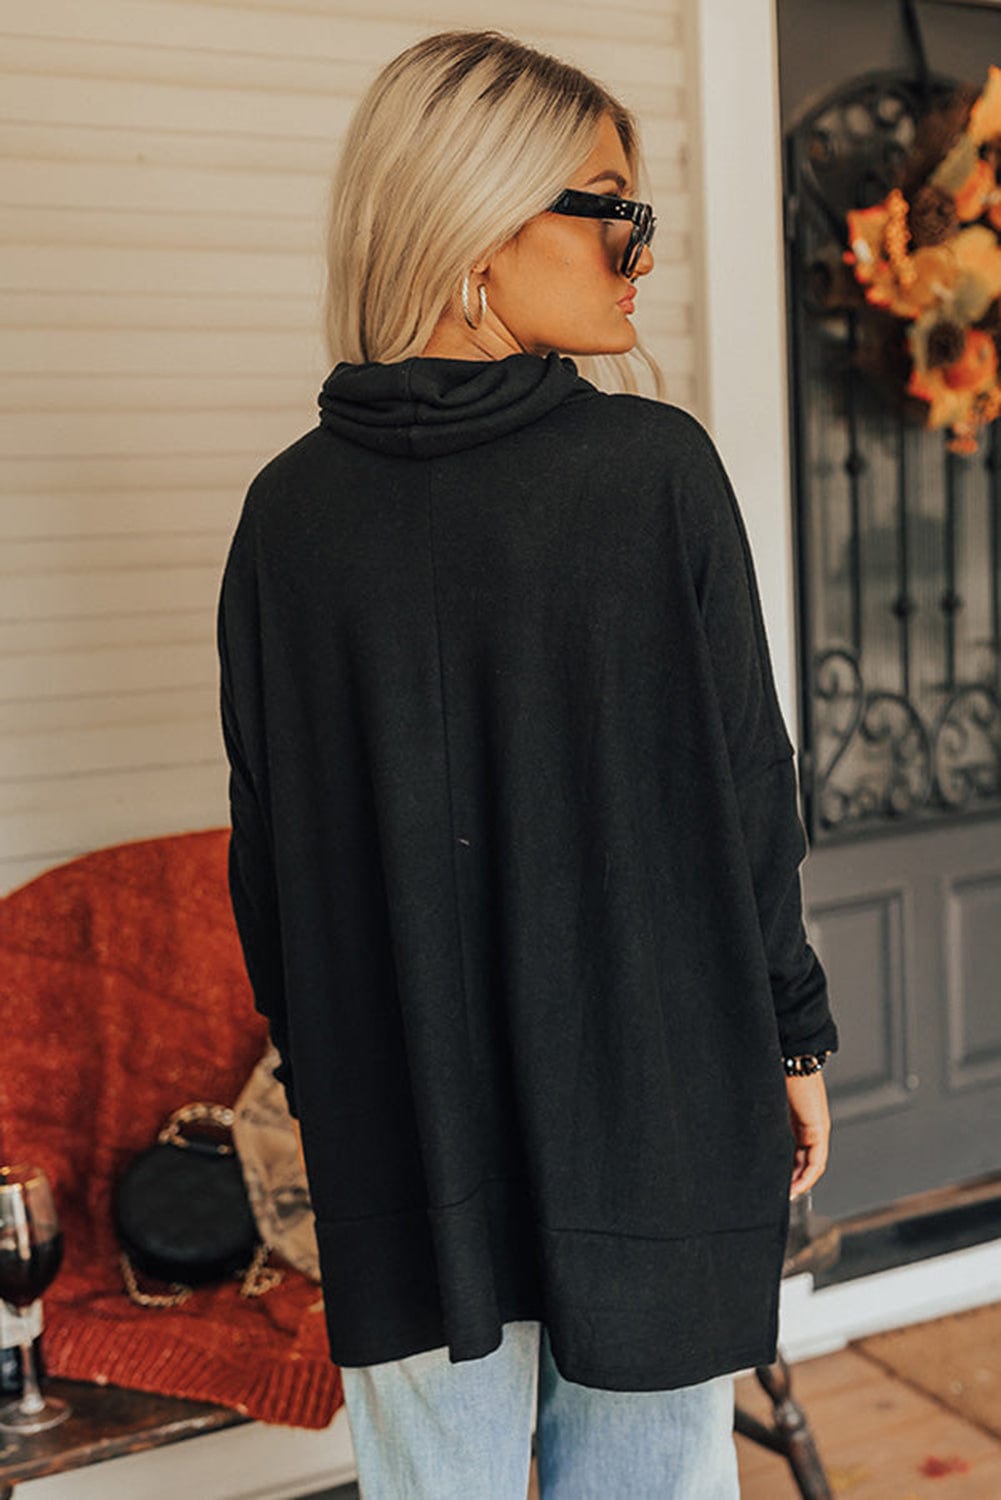 The802Gypsy  Tops/Long Sleeve Tops ❤️TRAVELING GYPSY-Cowl Neck Tunic Top